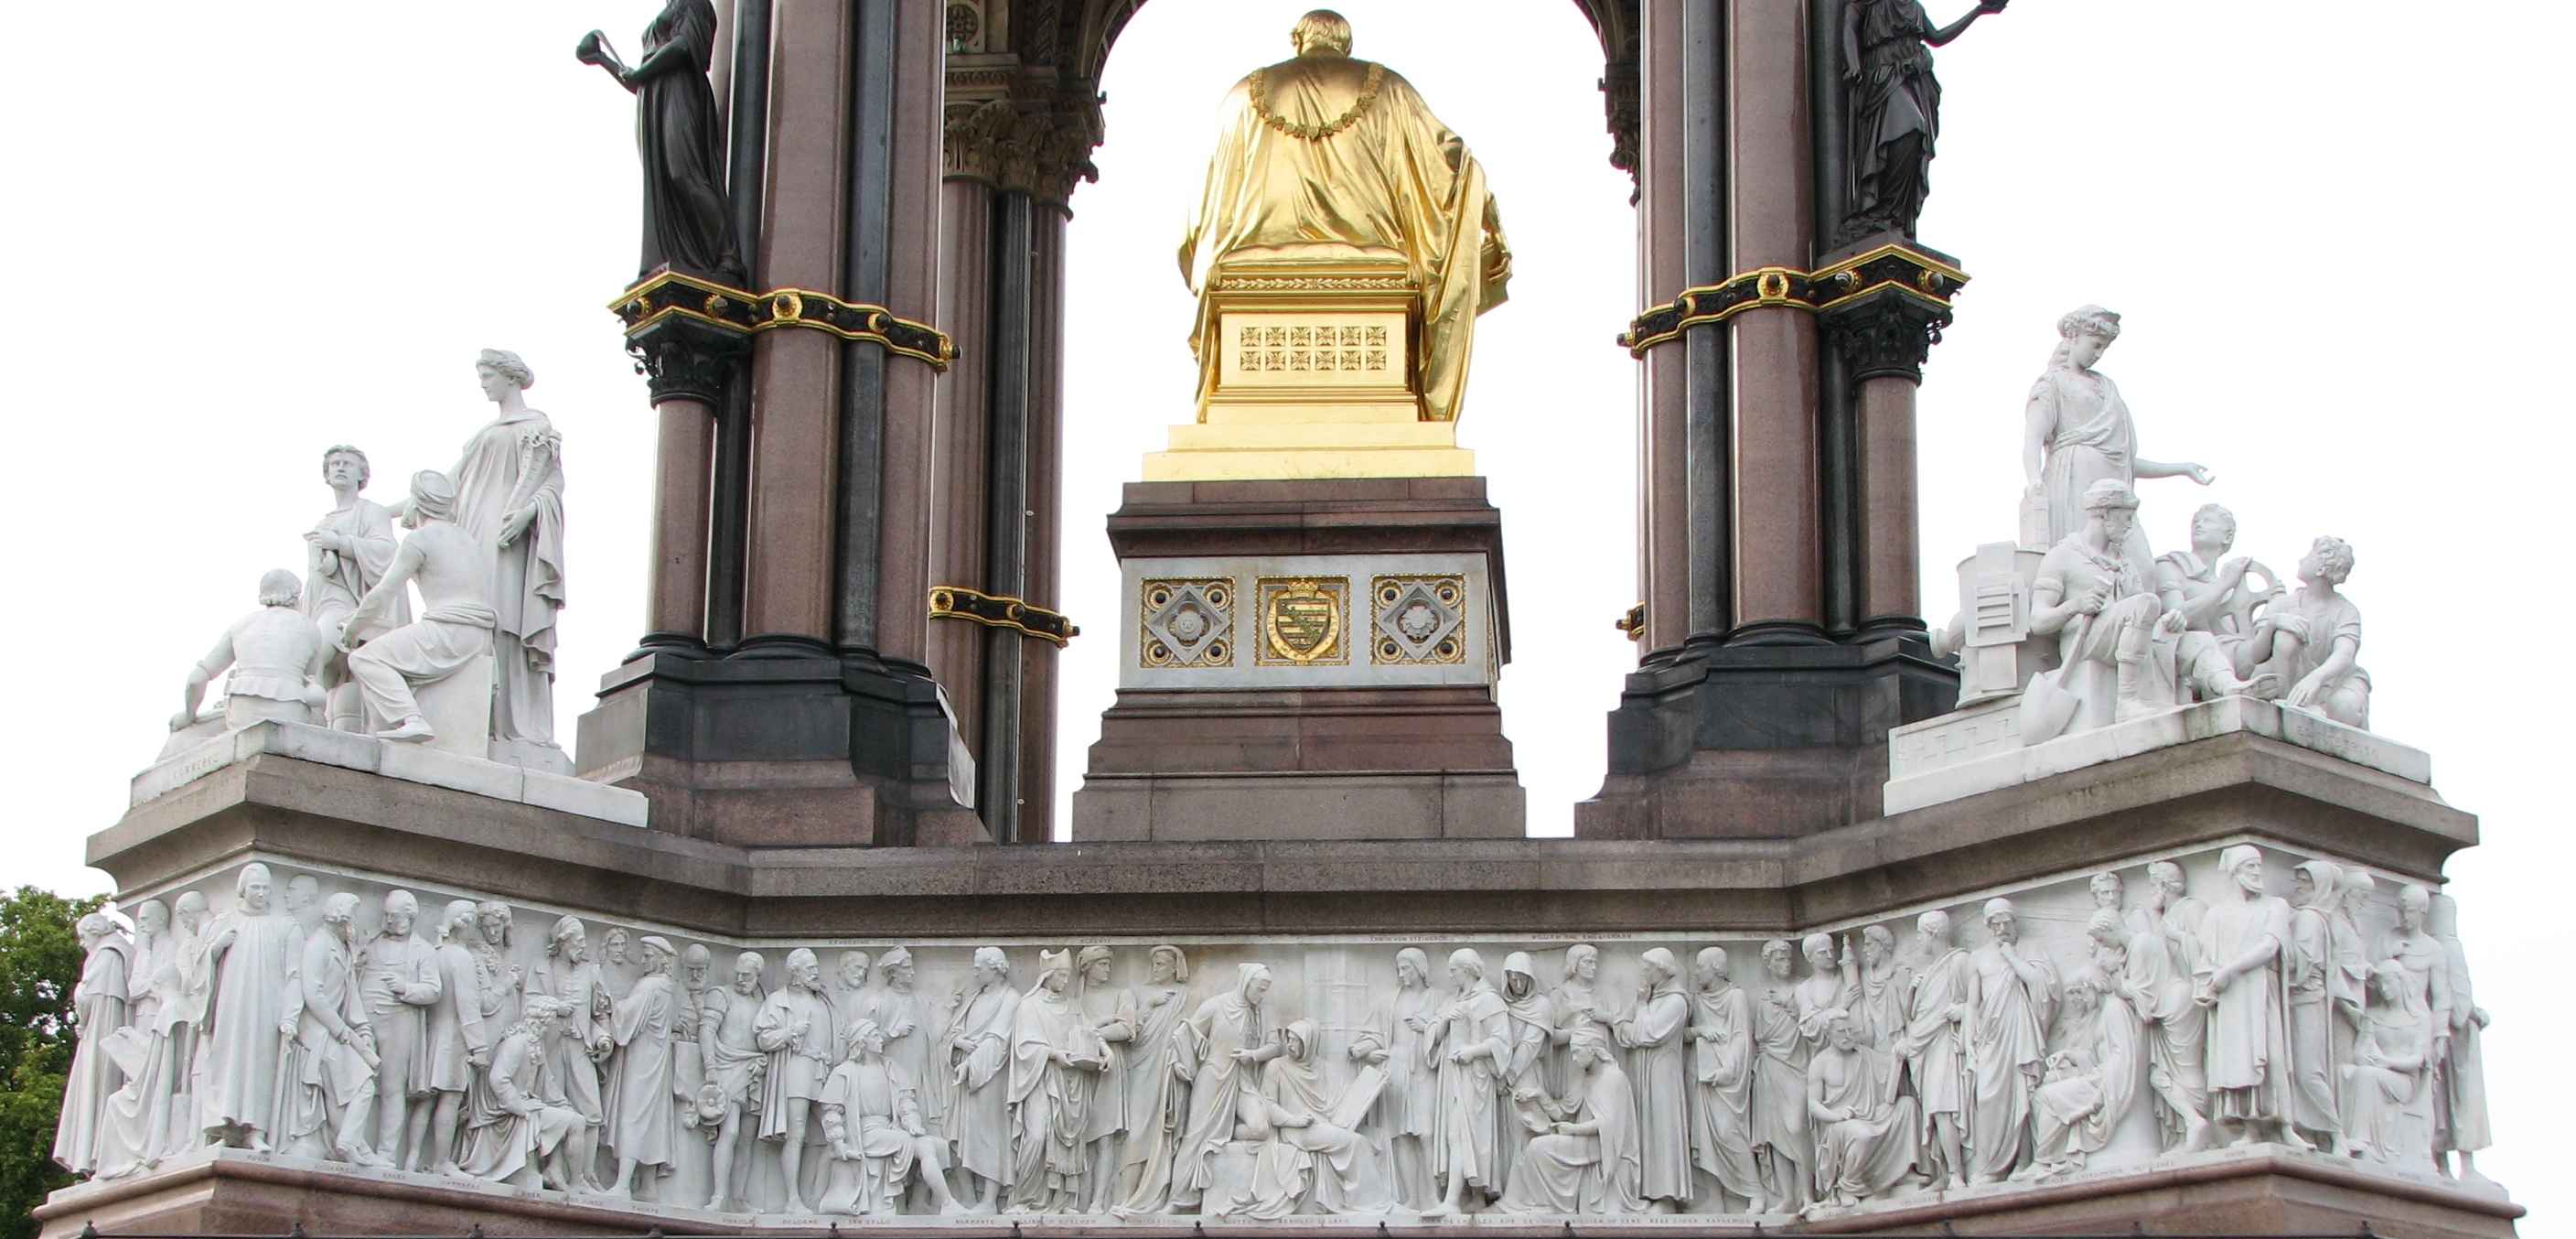 V&A façade - Prince Albert : London Remembers, Aiming to capture all  memorials in London